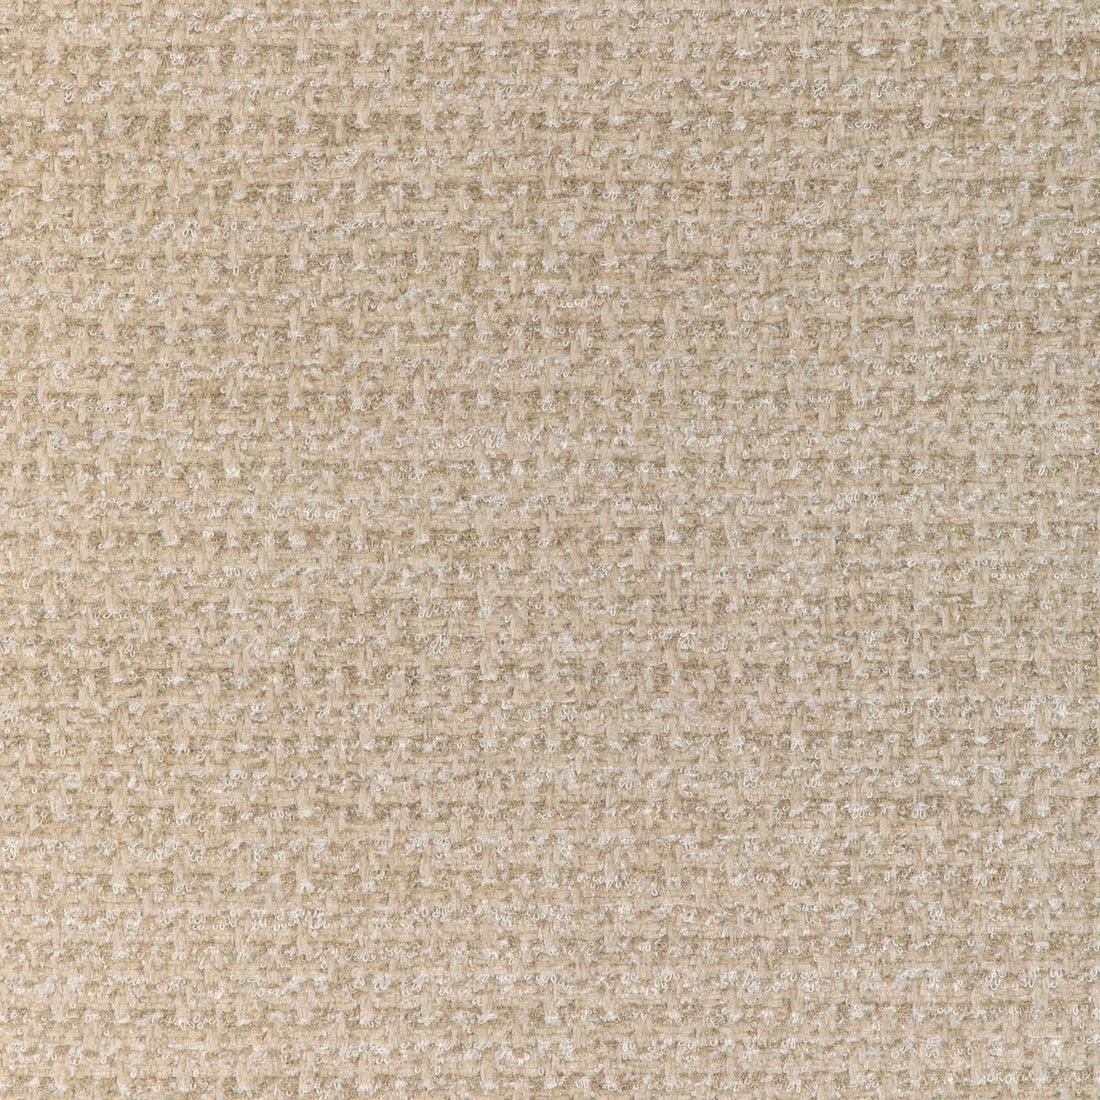 Nivolet Texture fabric in dove color - pattern 8023154.116.0 - by Brunschwig &amp; Fils in the Chambery Textures IV collection